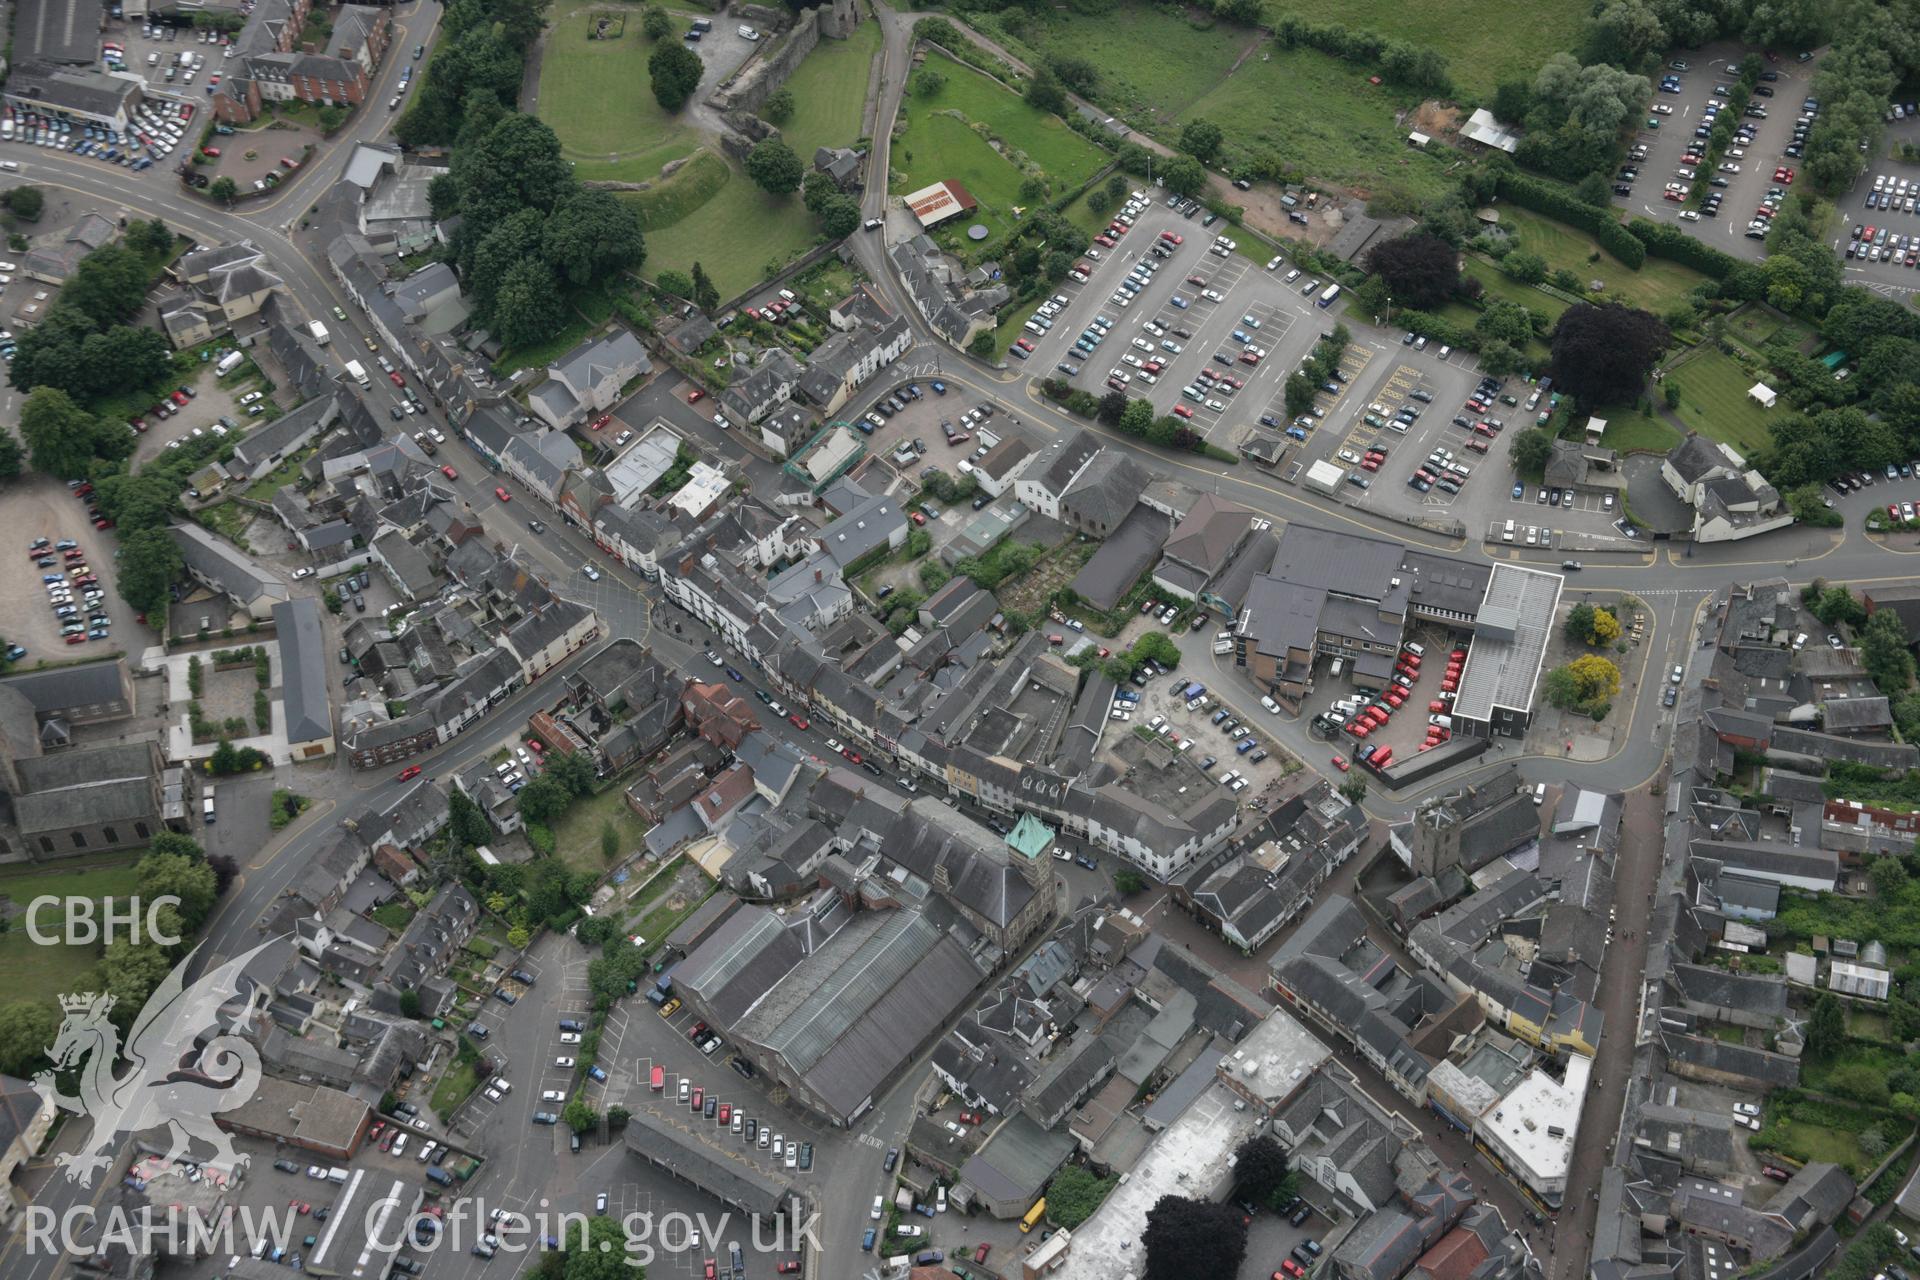 RCAHMW colour oblique aerial photograph of Abergavenny from the north with the town hall and market buildings. Taken on 07 July 2005 by Toby Driver